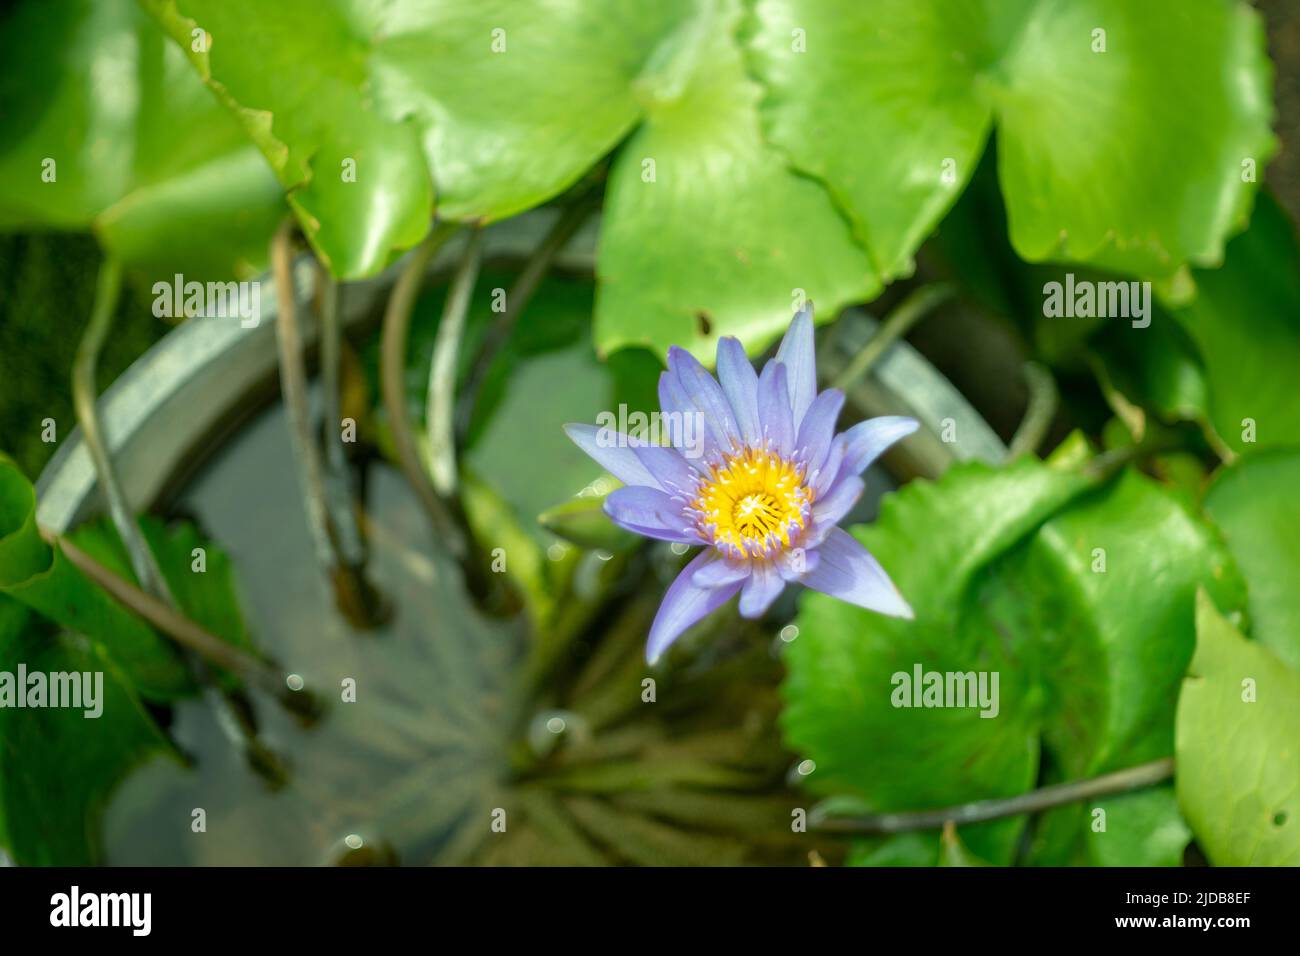 The lotus blooms in the morning in the swamp Stock Photo